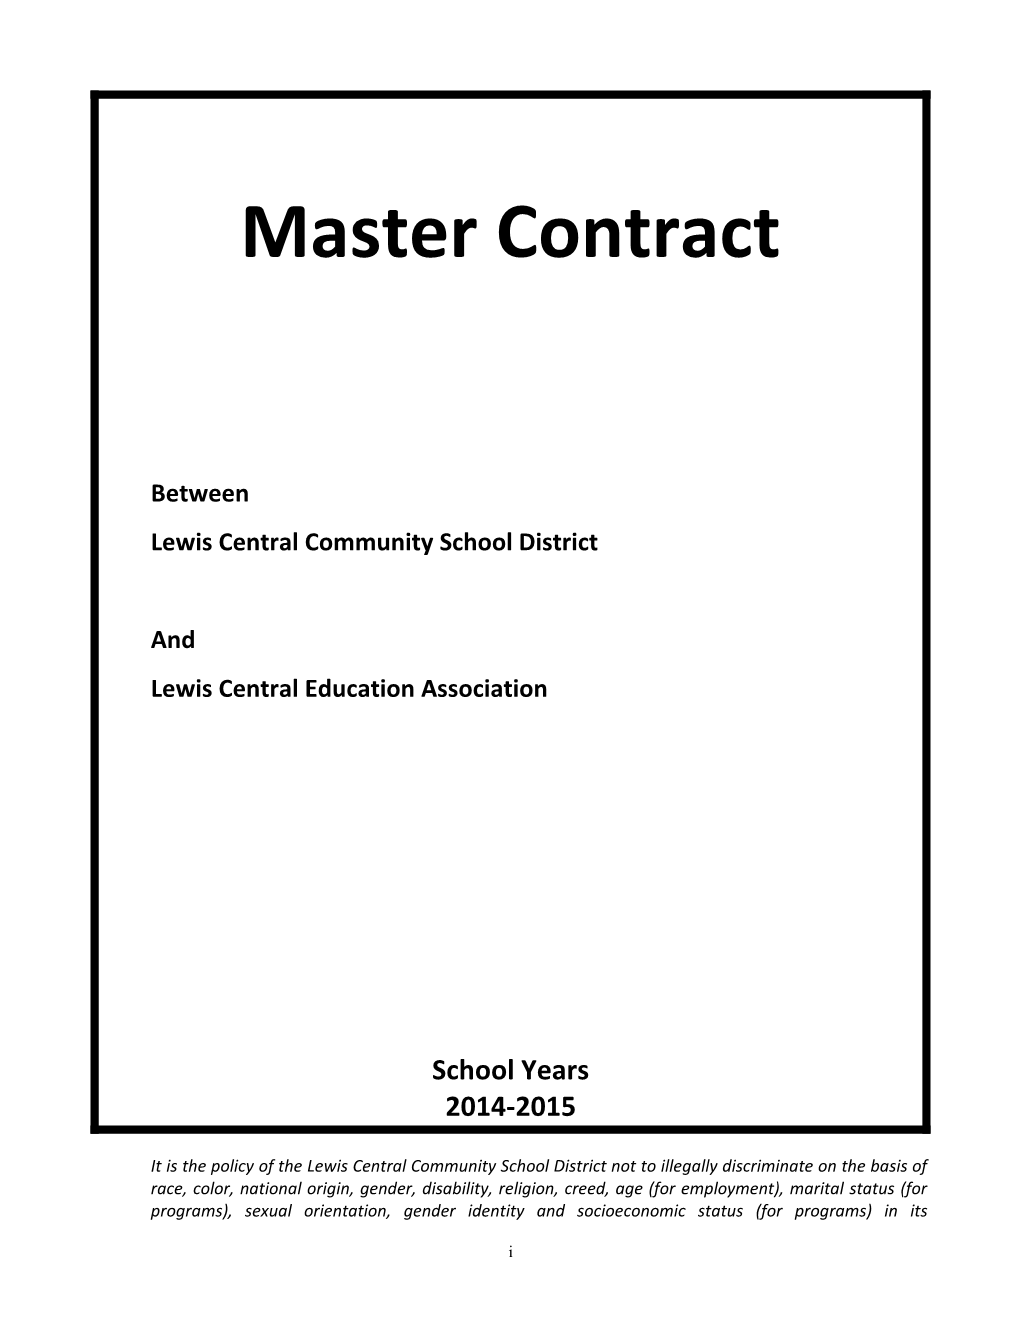 Lcea Master Contract